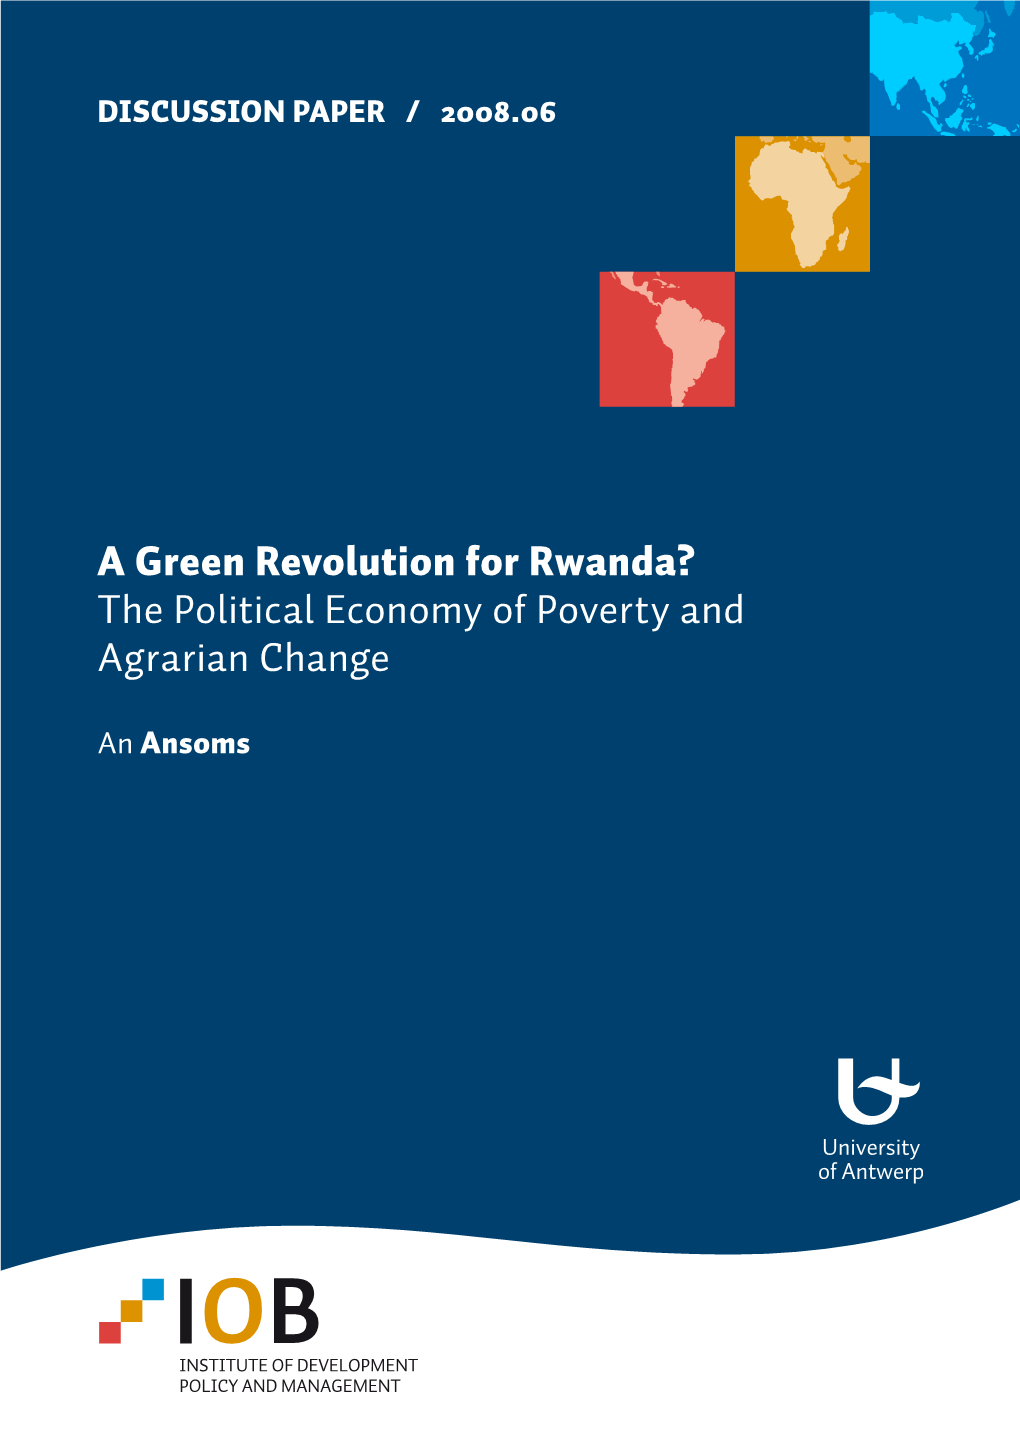 A Green Revolution for Rwanda? the Political Economy of Poverty and Agrarian Change